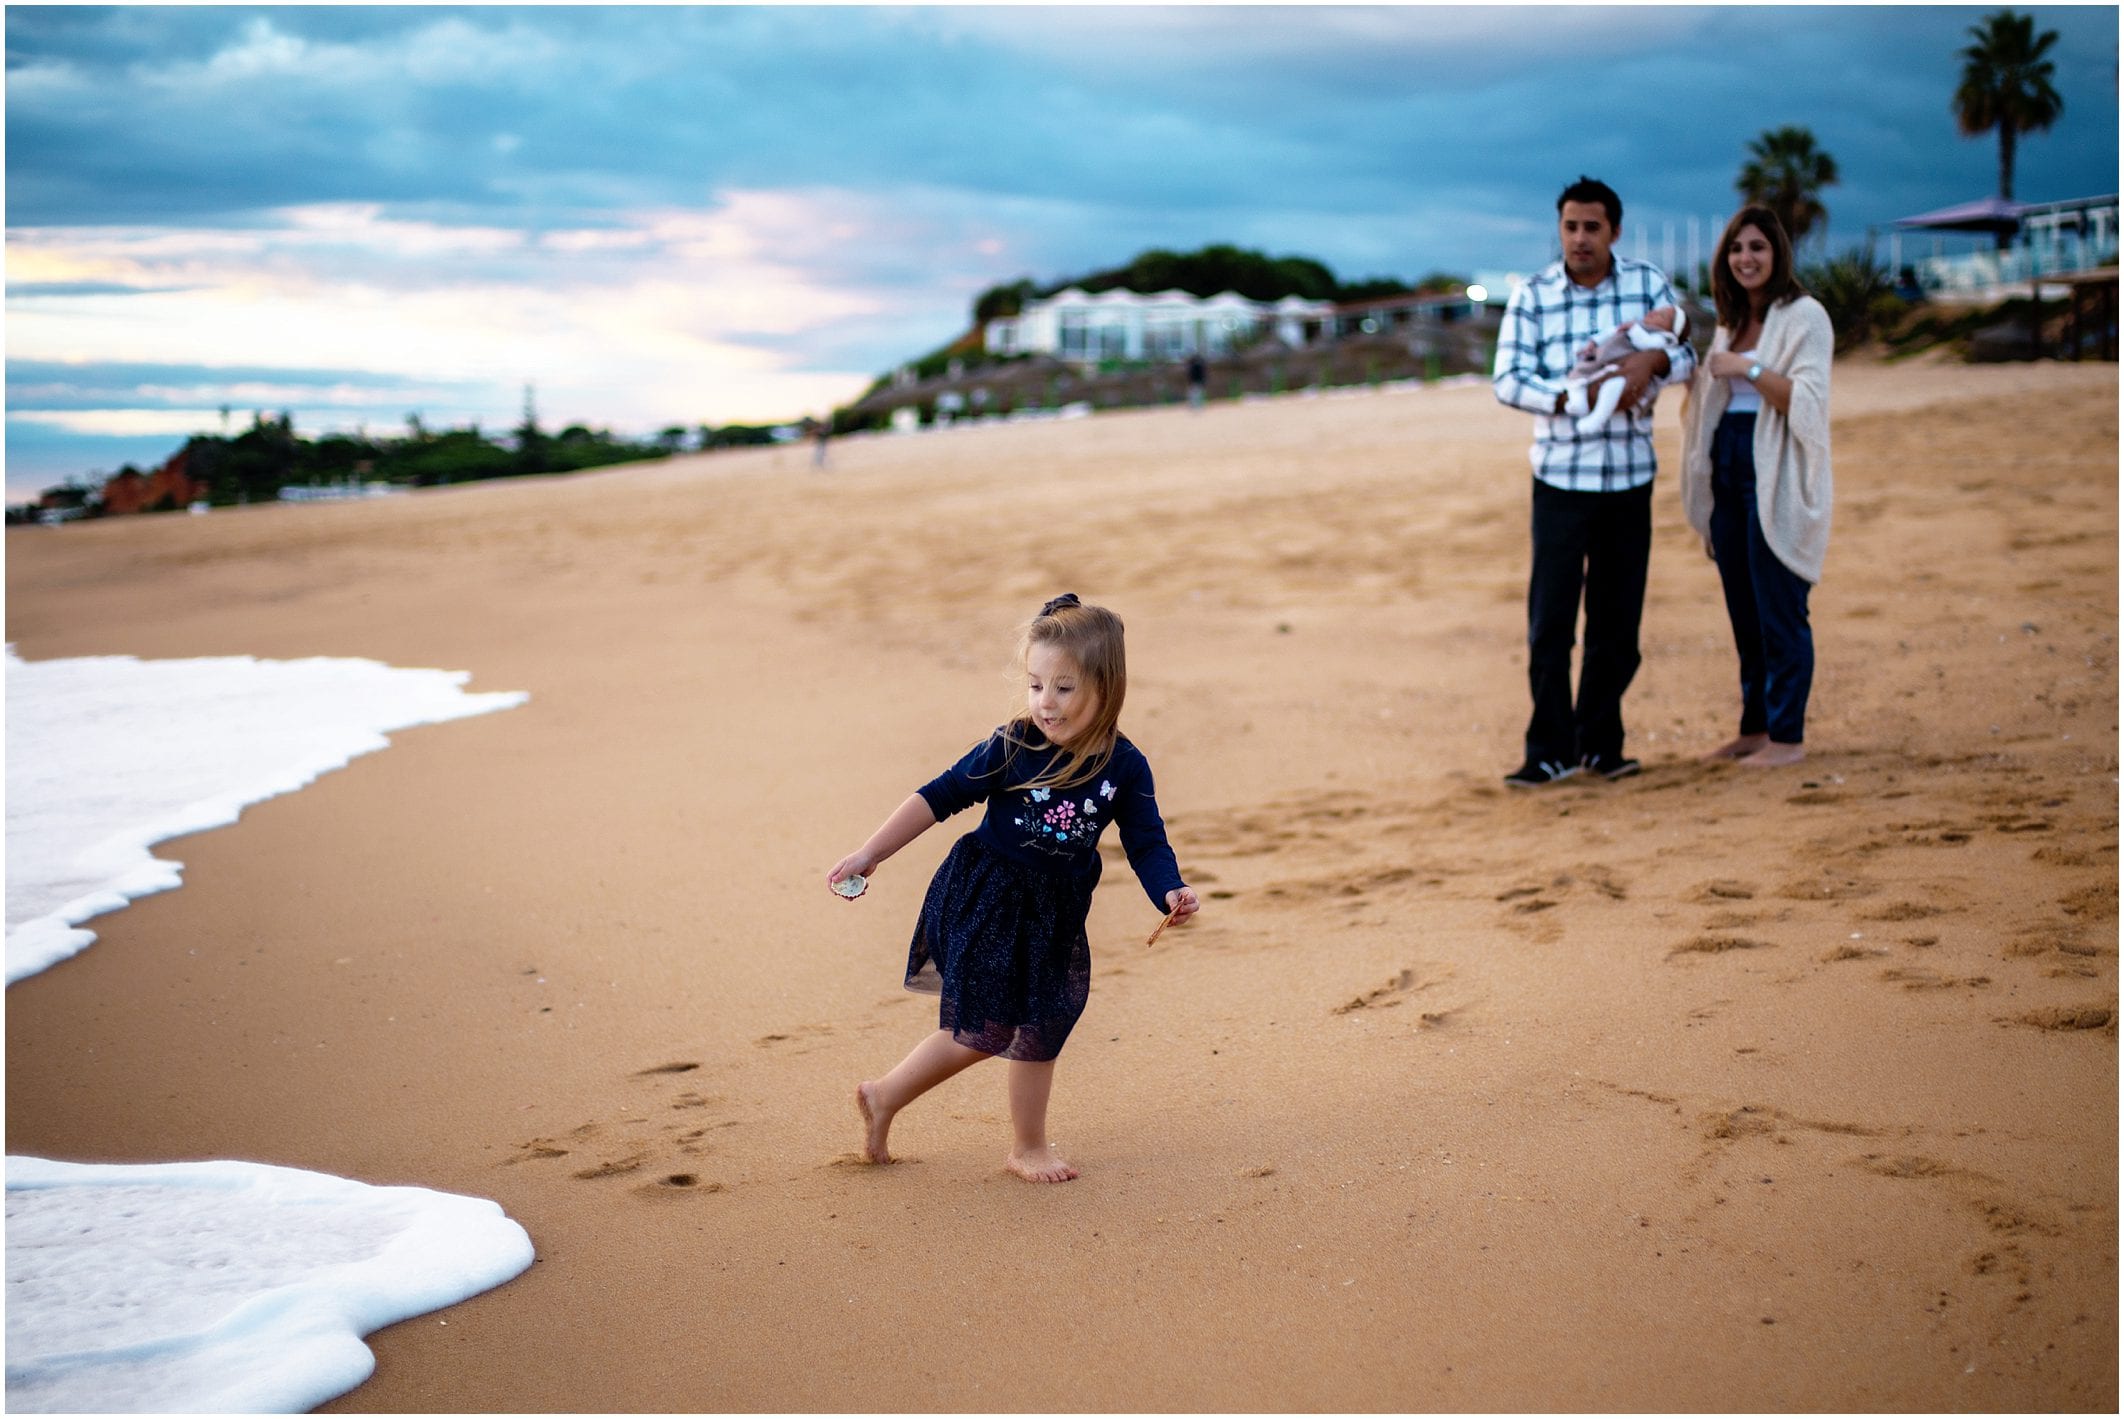 Helena Woods shares her recent family beach session in Portugal at Quinta do Lago, Algarve. Destination Family and Children's photographer travels worldwide for lifestyle emotive family portraiture.